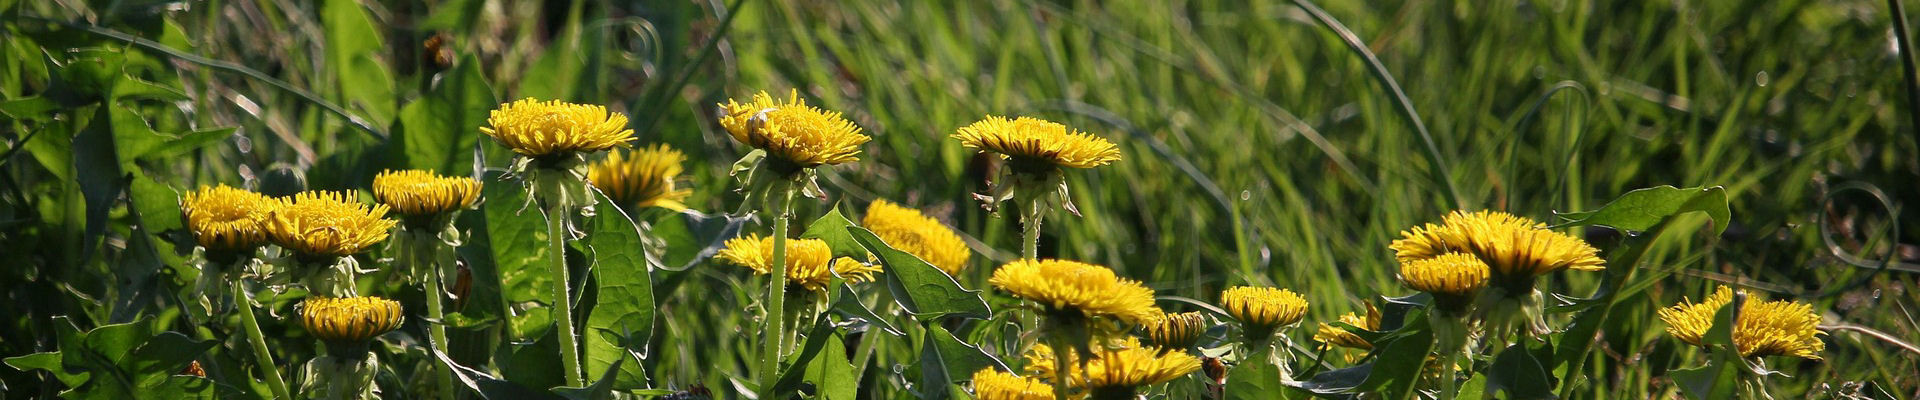 Nature & Great Outdoors - Park and Countryside - dandelion - Martigues